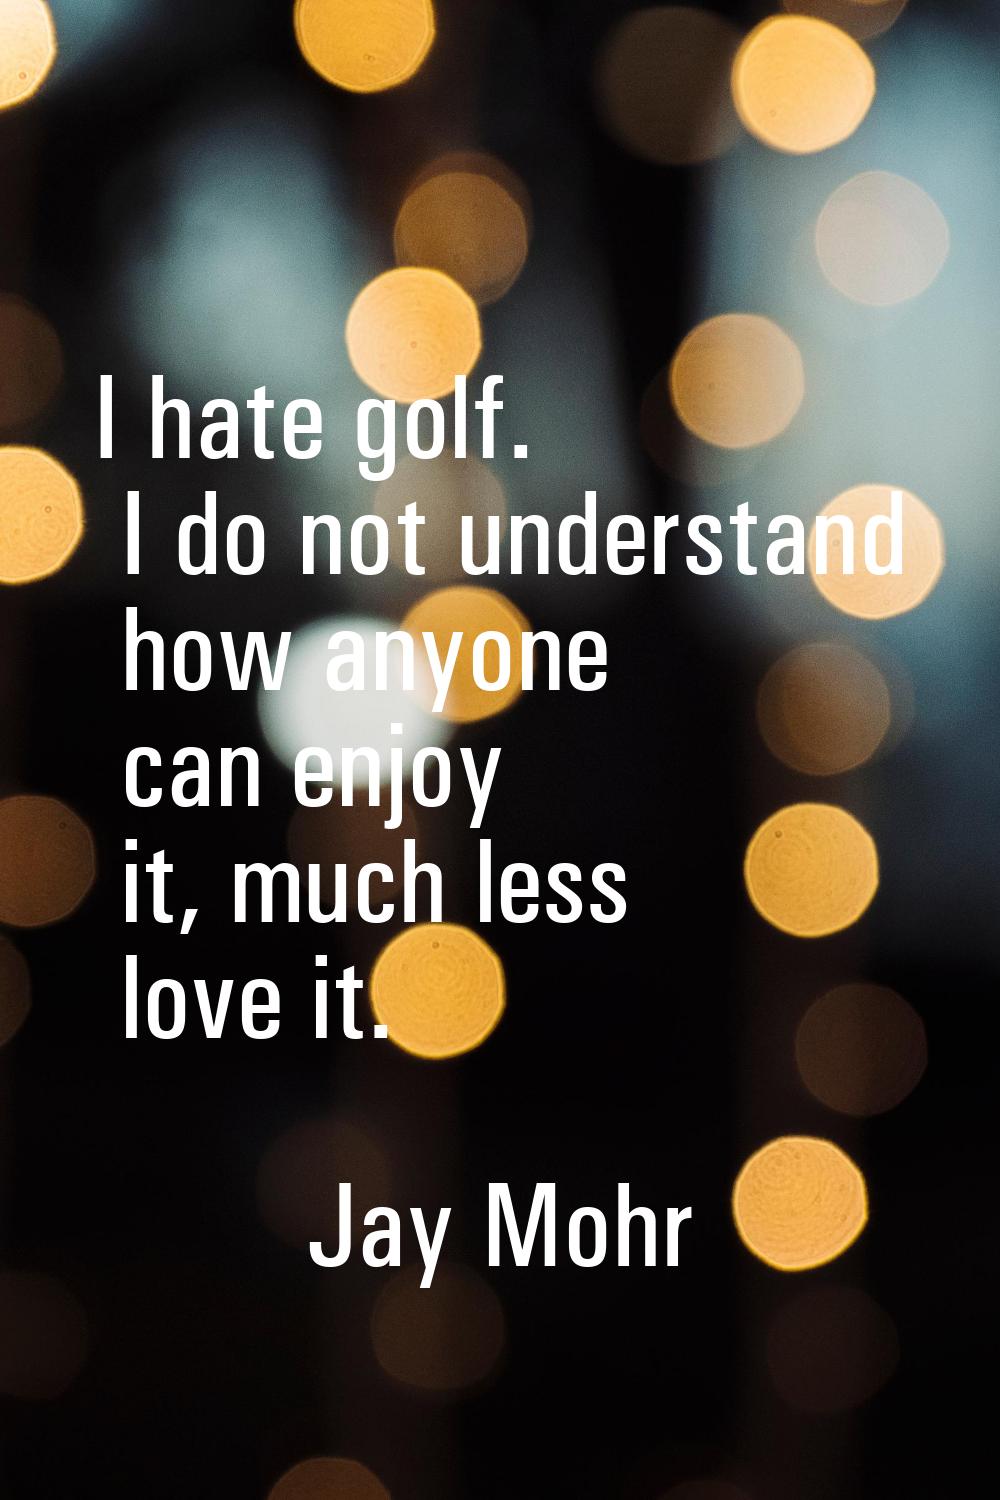 I hate golf. I do not understand how anyone can enjoy it, much less love it.